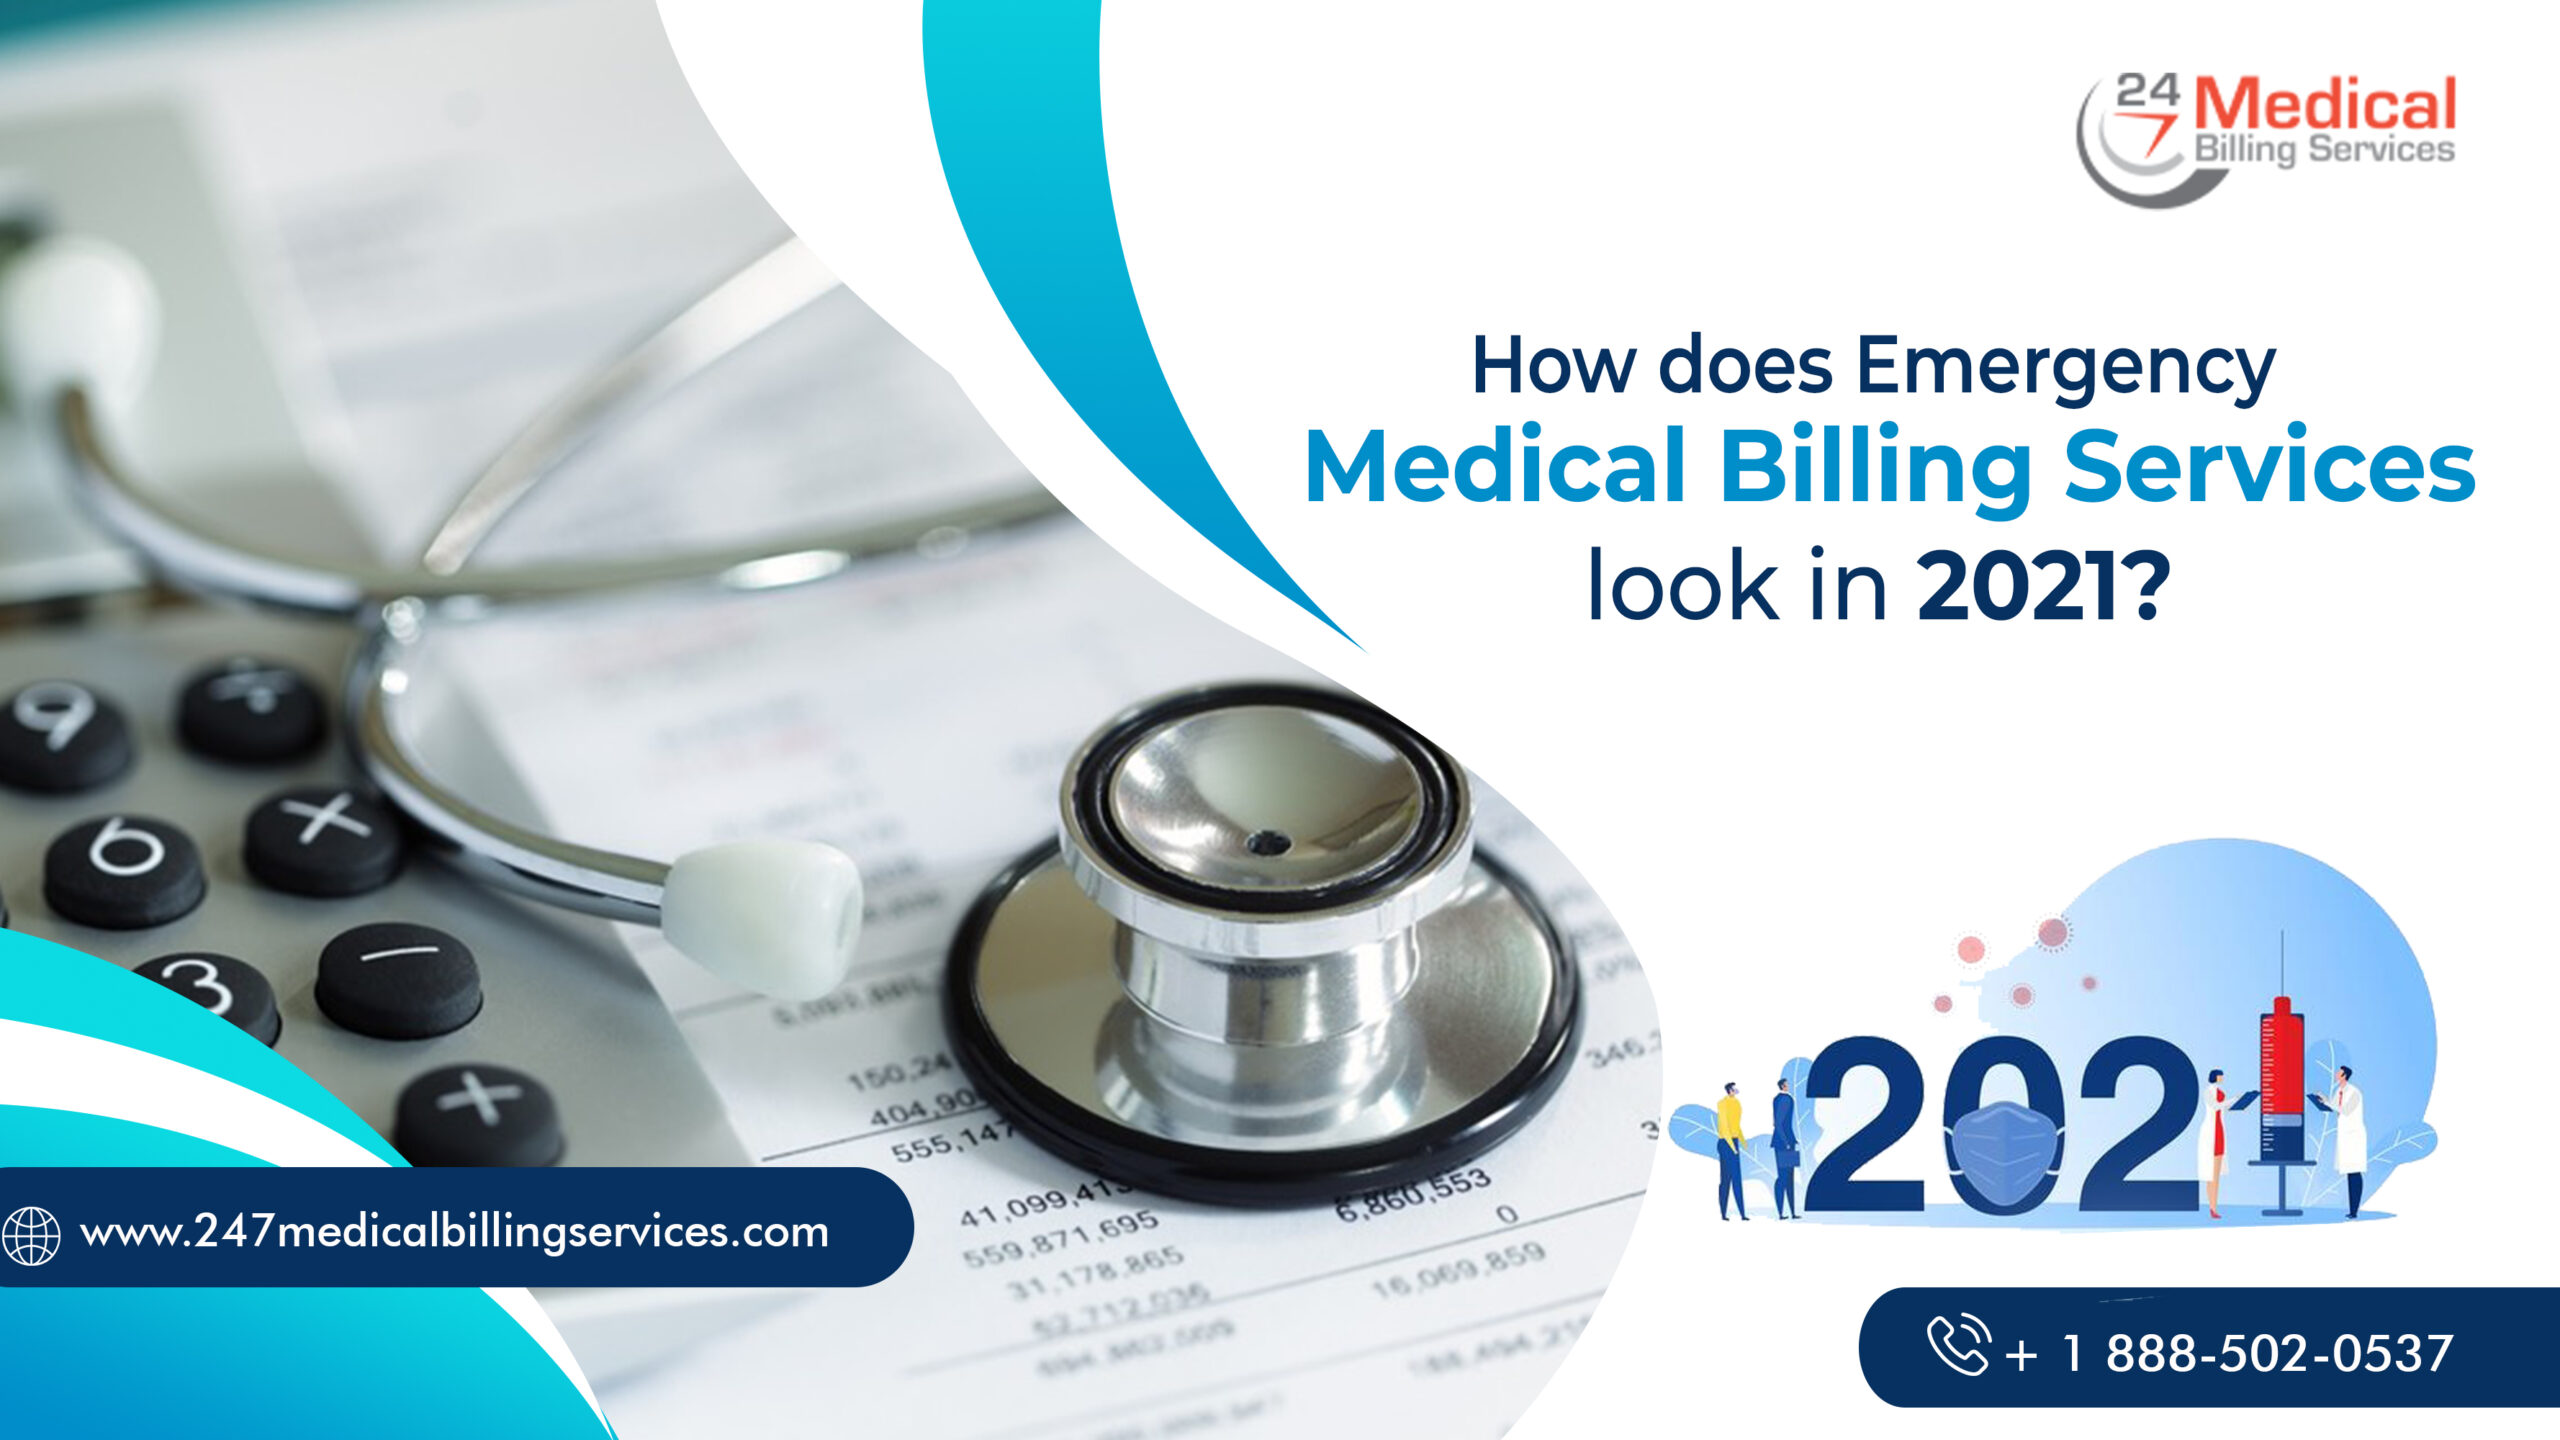  How does Emergency Medical Billing Services look in 2021?